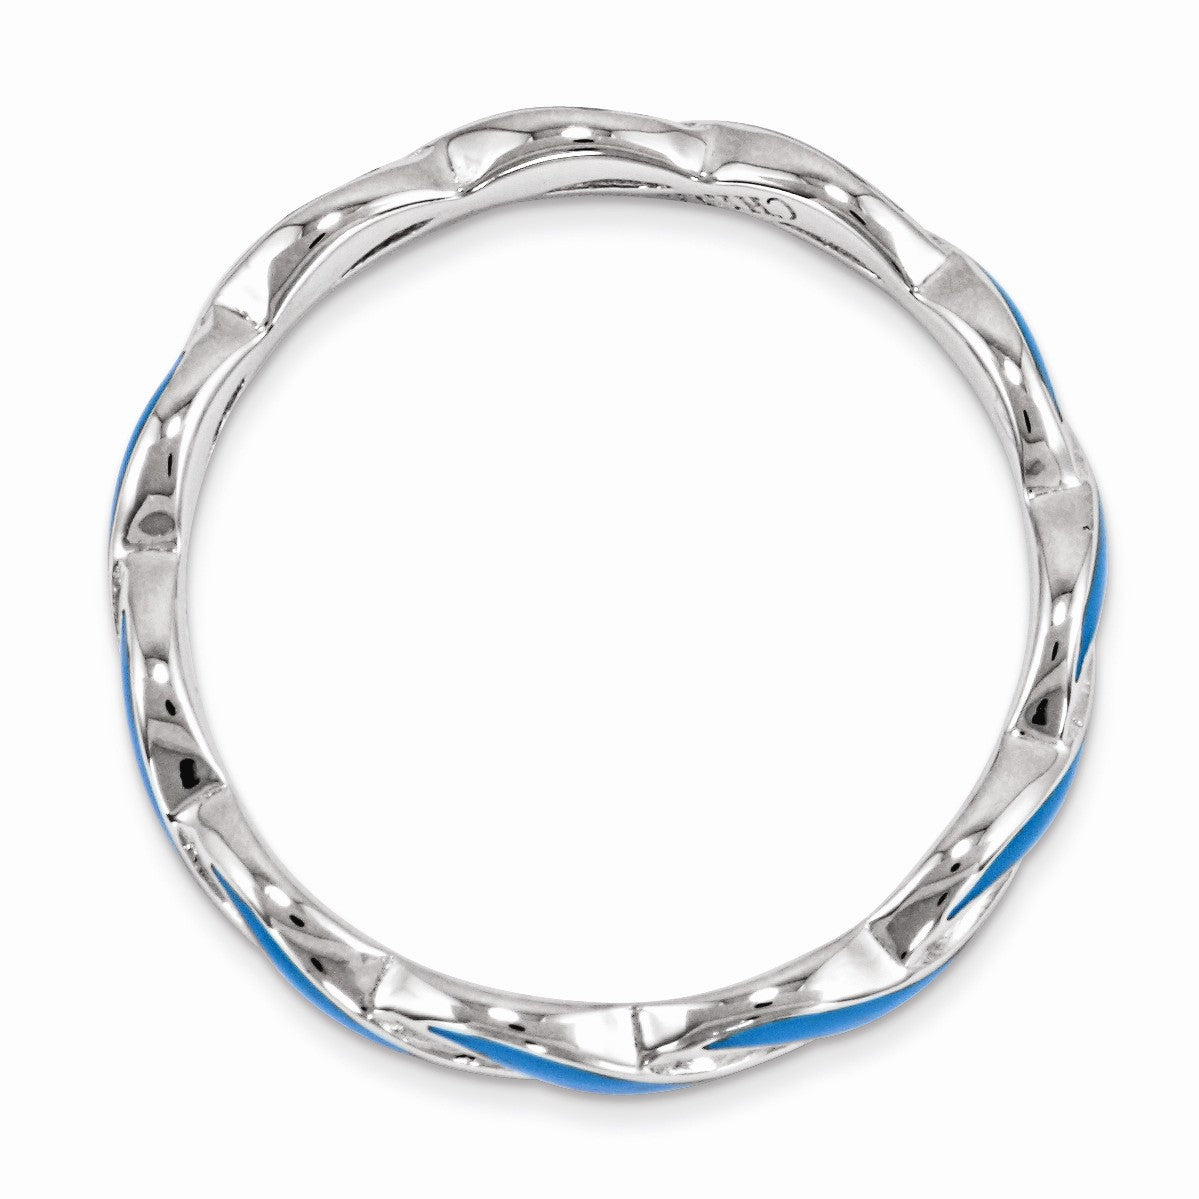 Alternate view of the 2mm Sterling Silver Stackable Expressions Blue Enamel Swirl Band by The Black Bow Jewelry Co.